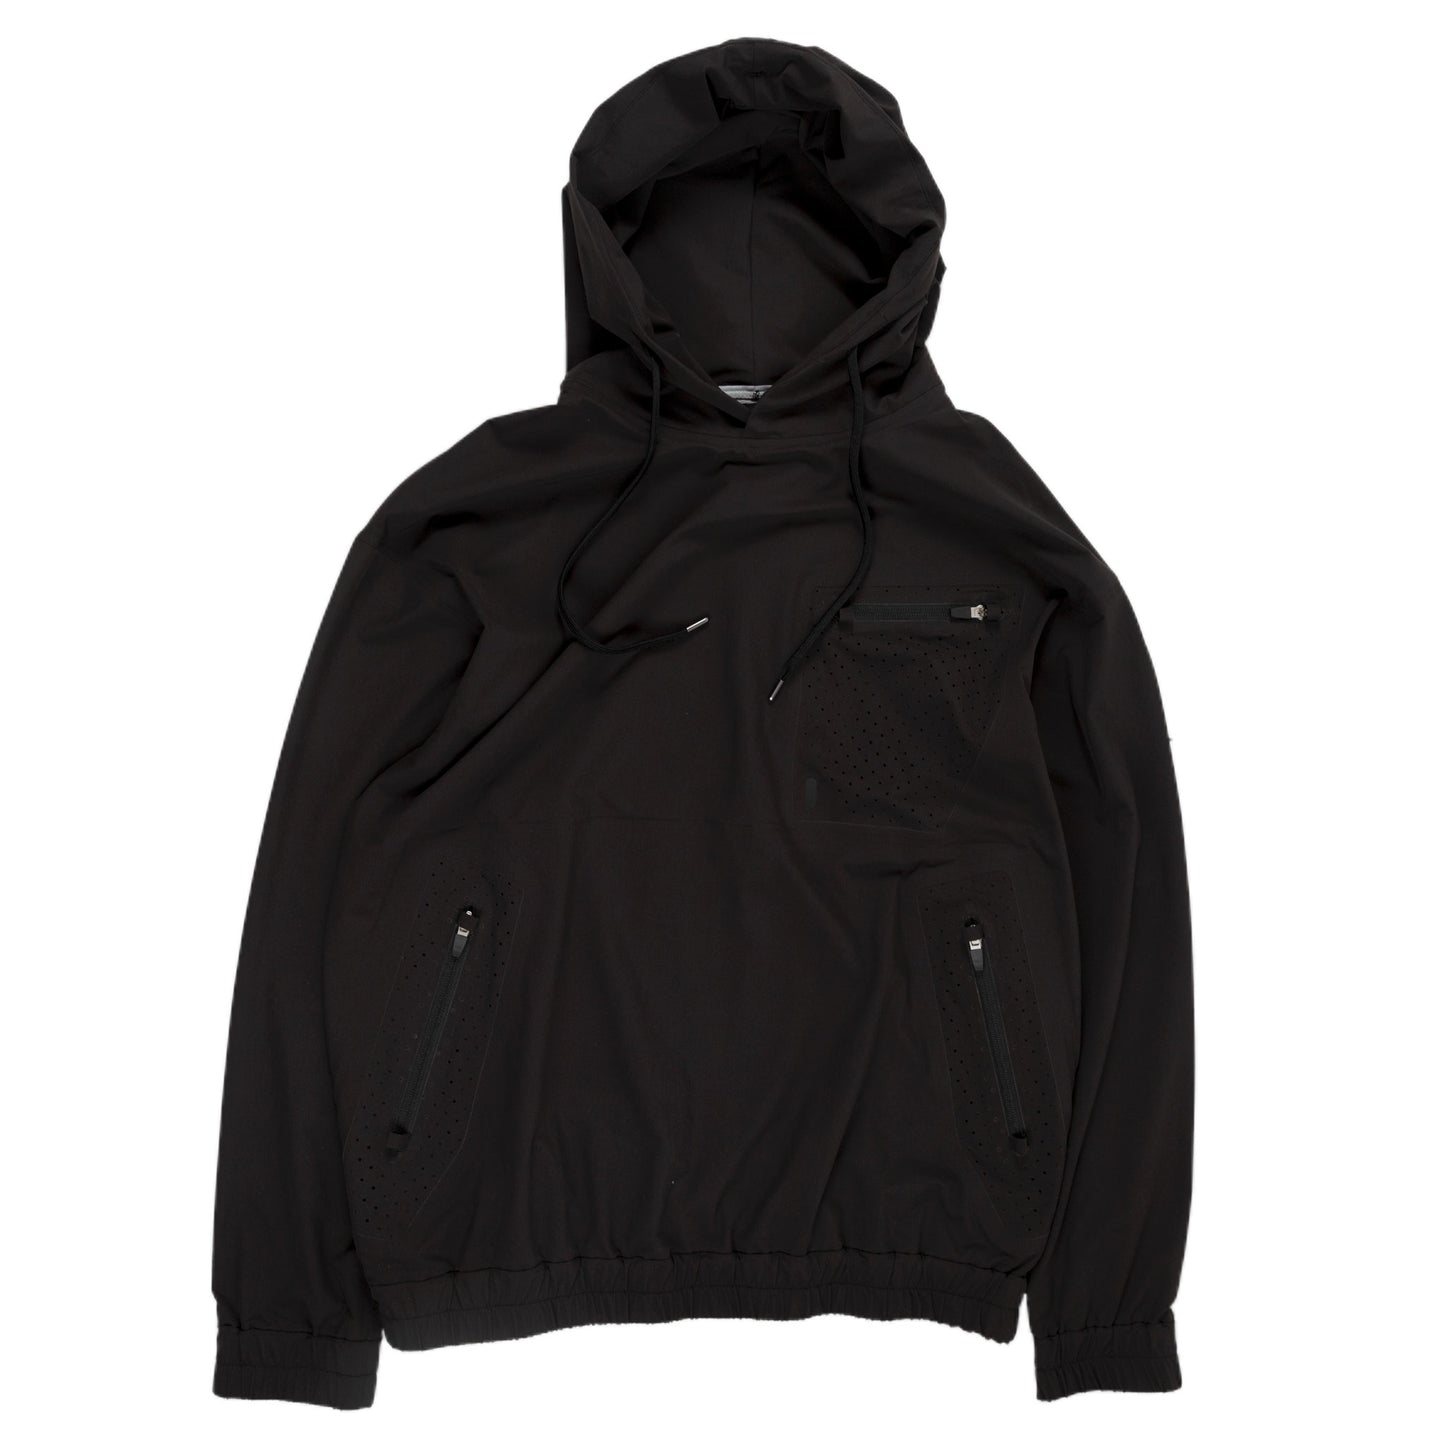 Gramicci Sonora Pertex Hoodie in Black all weather weatherproof outer wear front